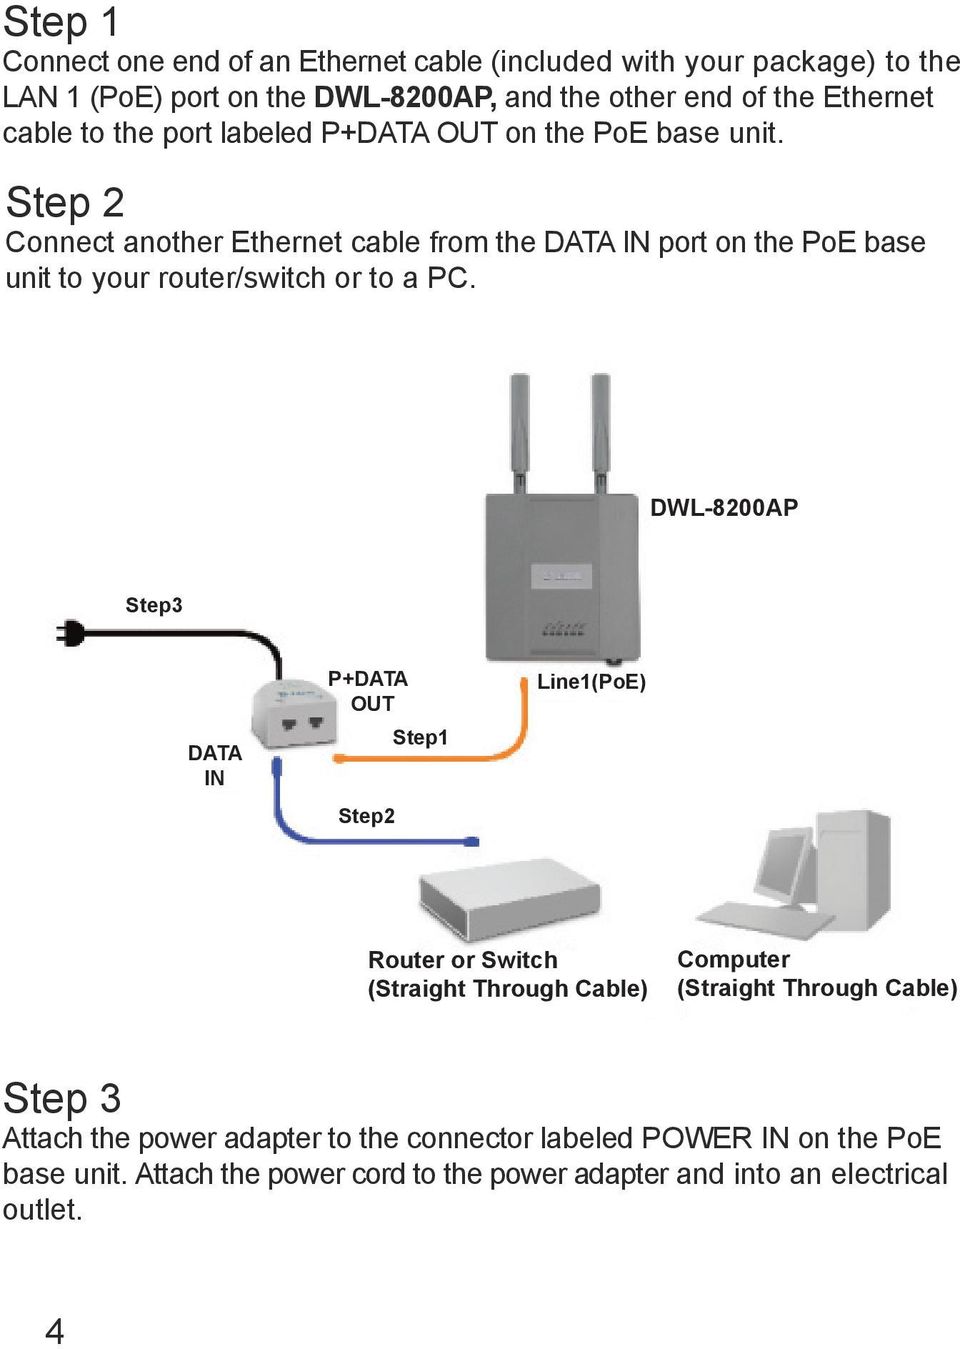 Step 2 Connect another Ethernet cable from the DATA IN port on the PoE base unit to your router/switch or to a PC.